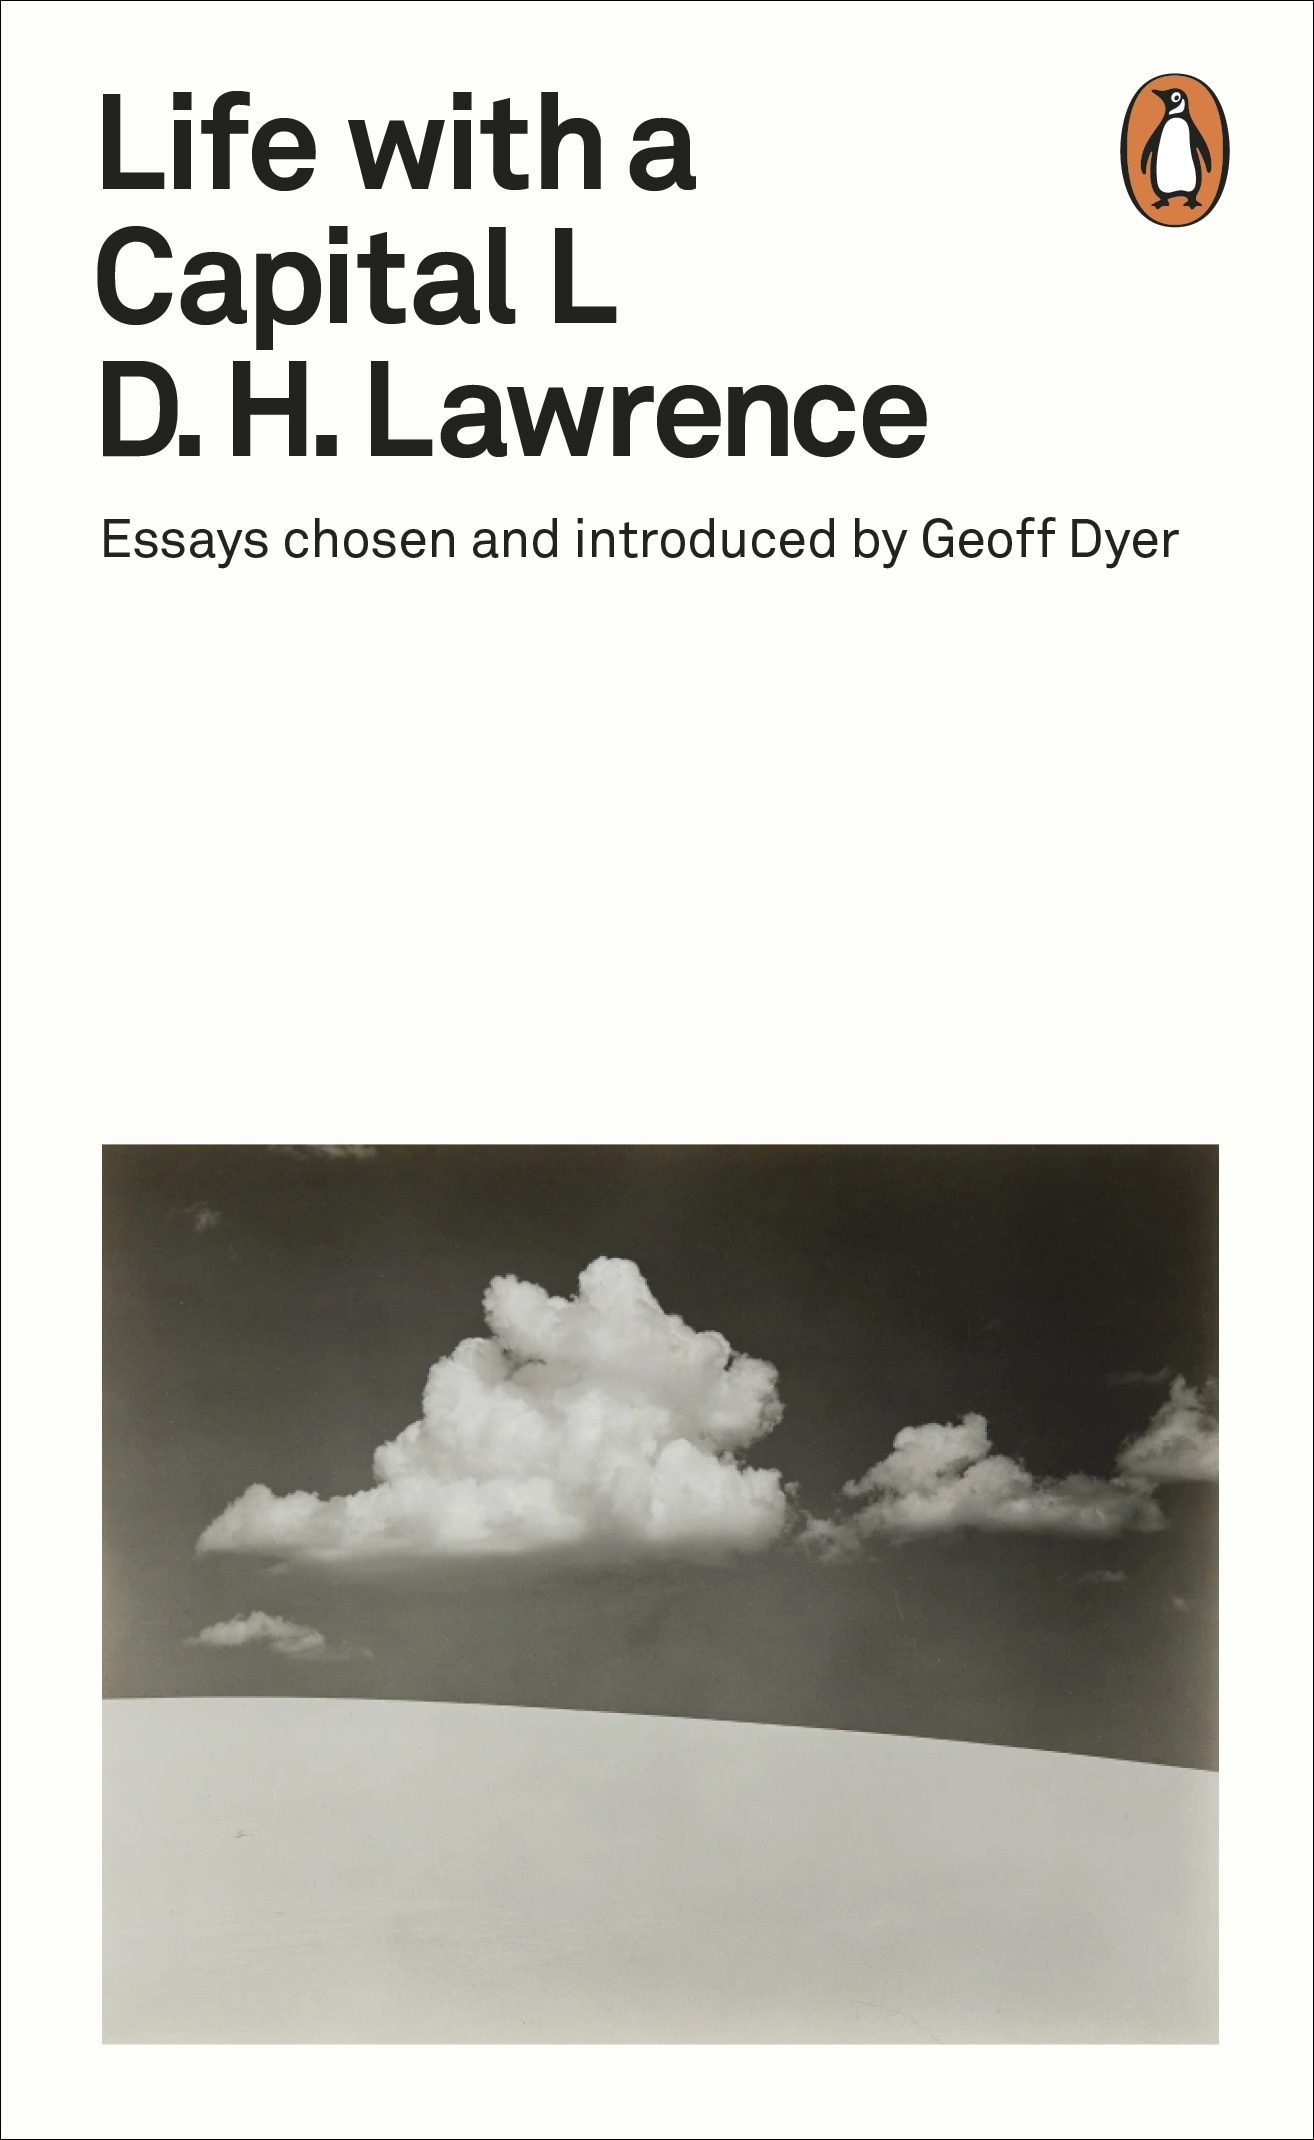 Book “Life with a Capital L” by D H Lawrence, Geoff Dyer — January 31, 2019